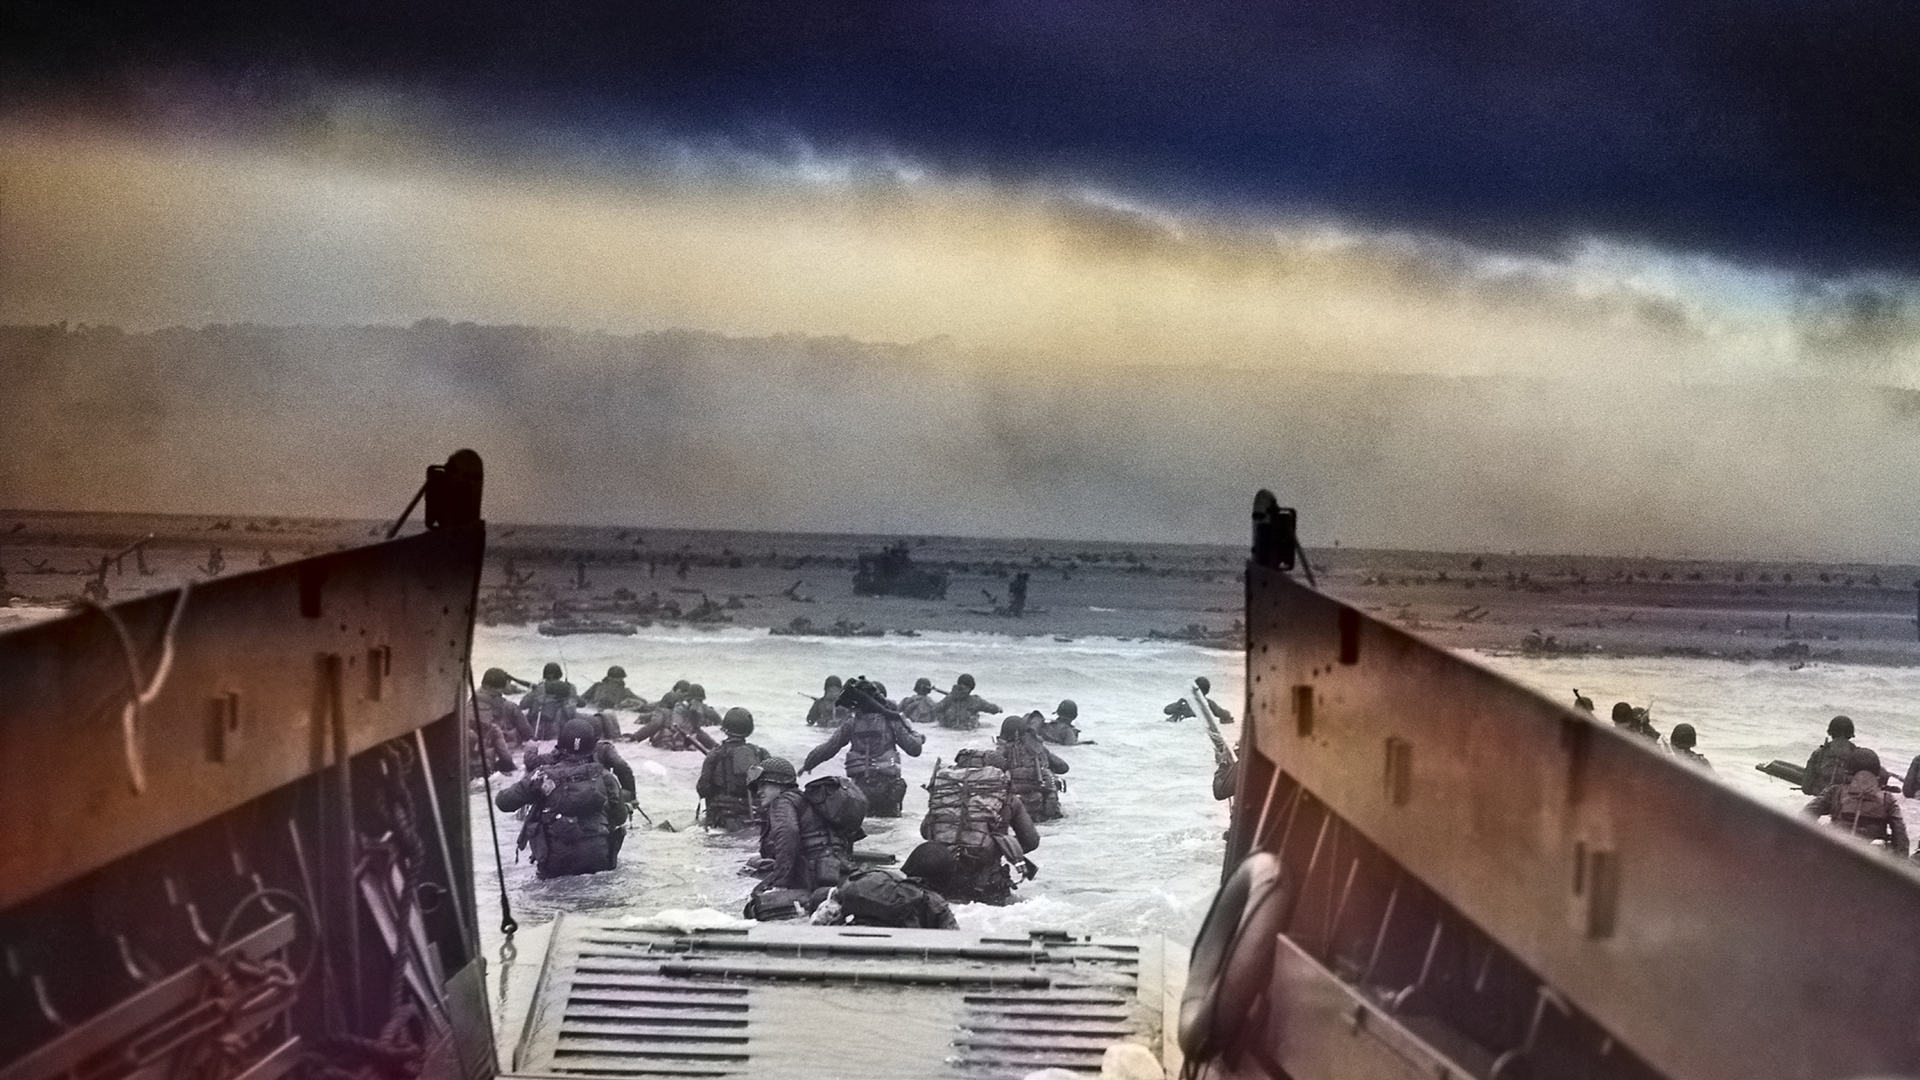 D-Day: How Allied Forces Overcame Disastrous Landings to Rout the Nazis